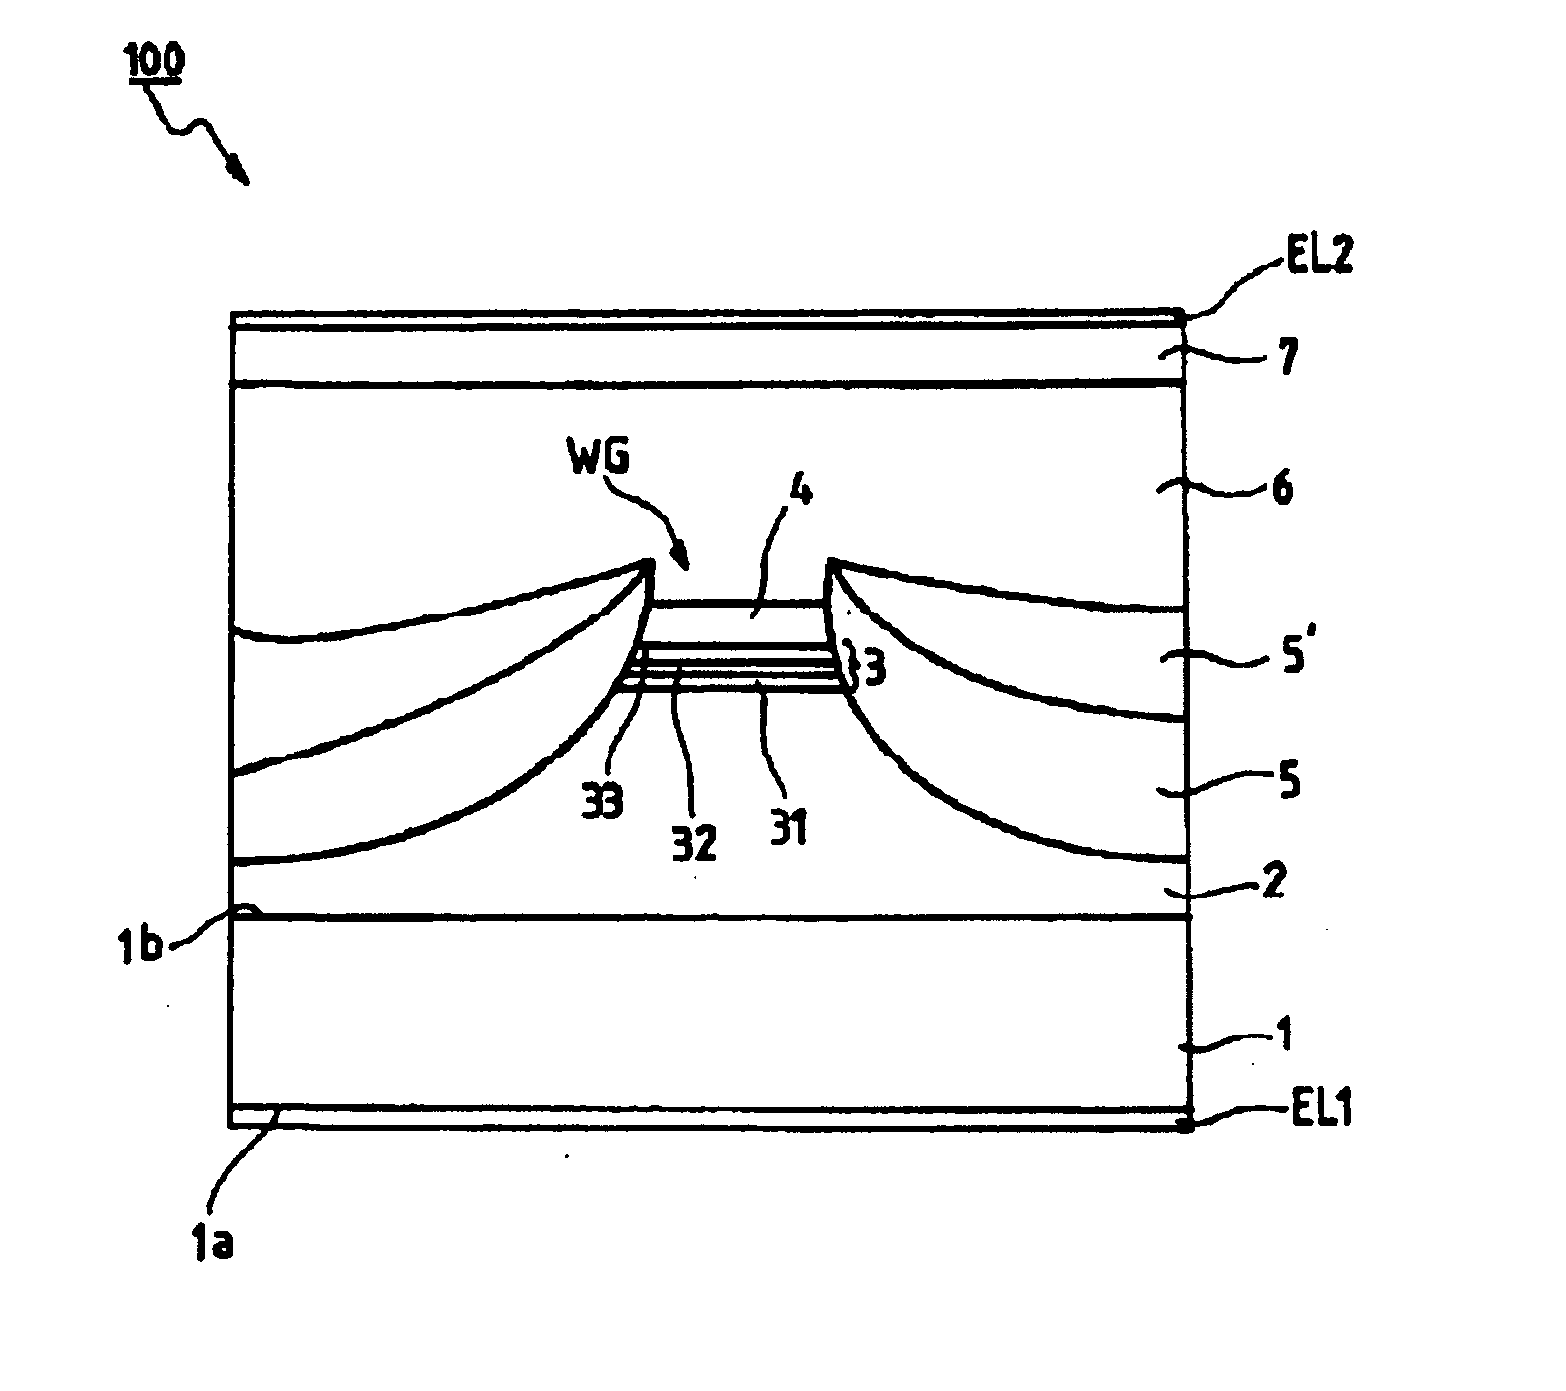 Semiconductor optical device on an indium phosphide substrate for long operating wavelengths